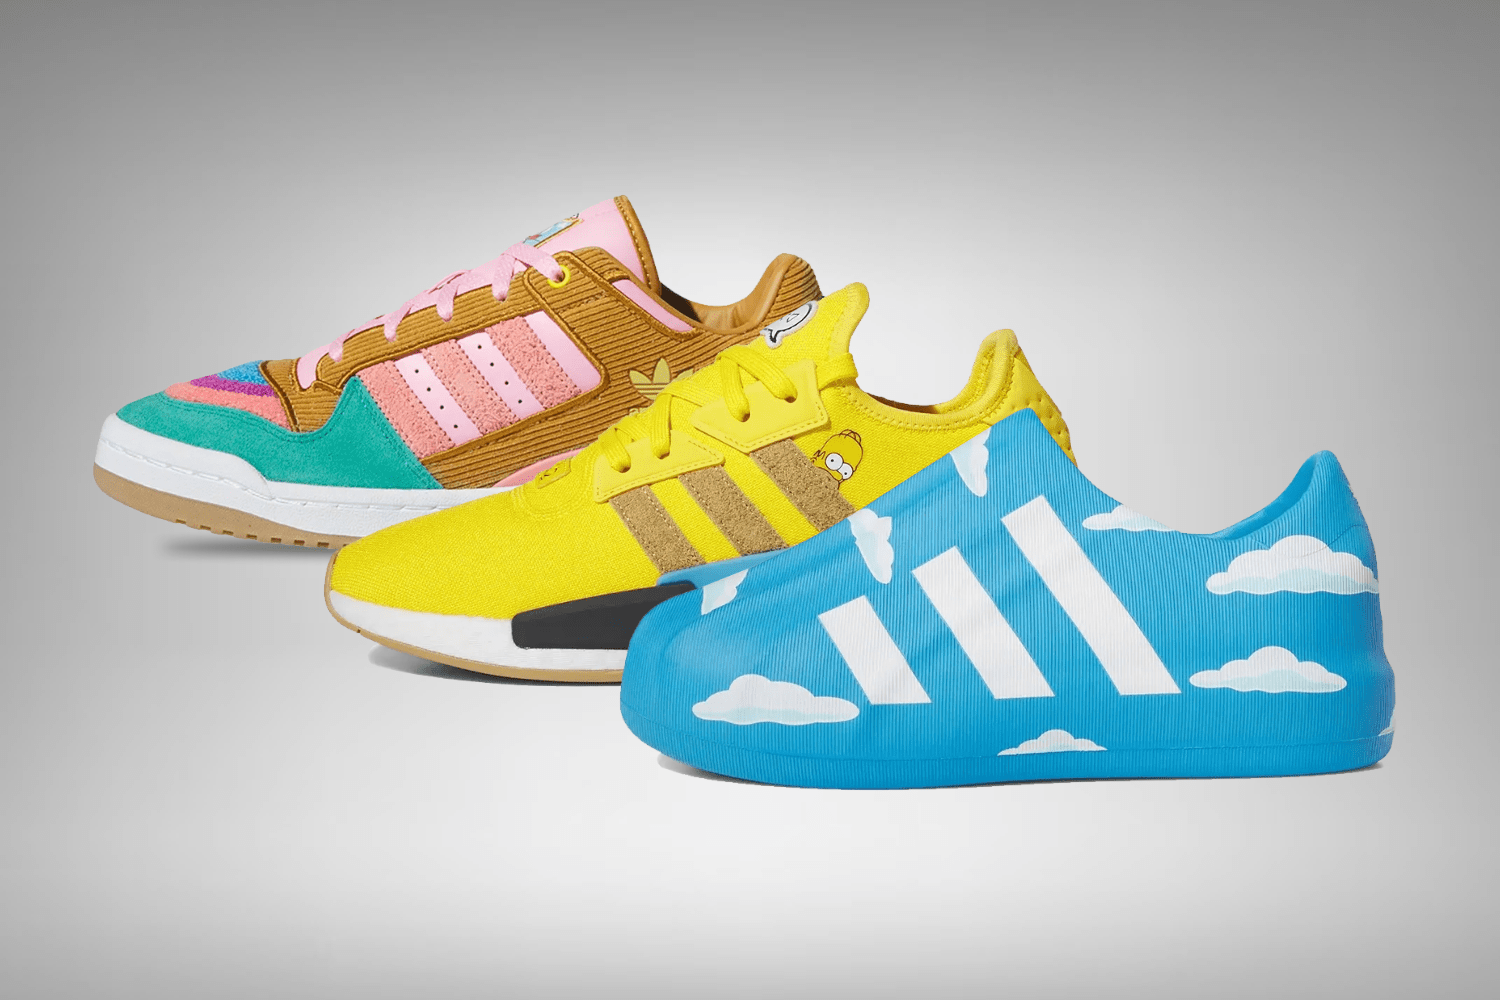 The Simpsons x adidas pack comes with three new designs